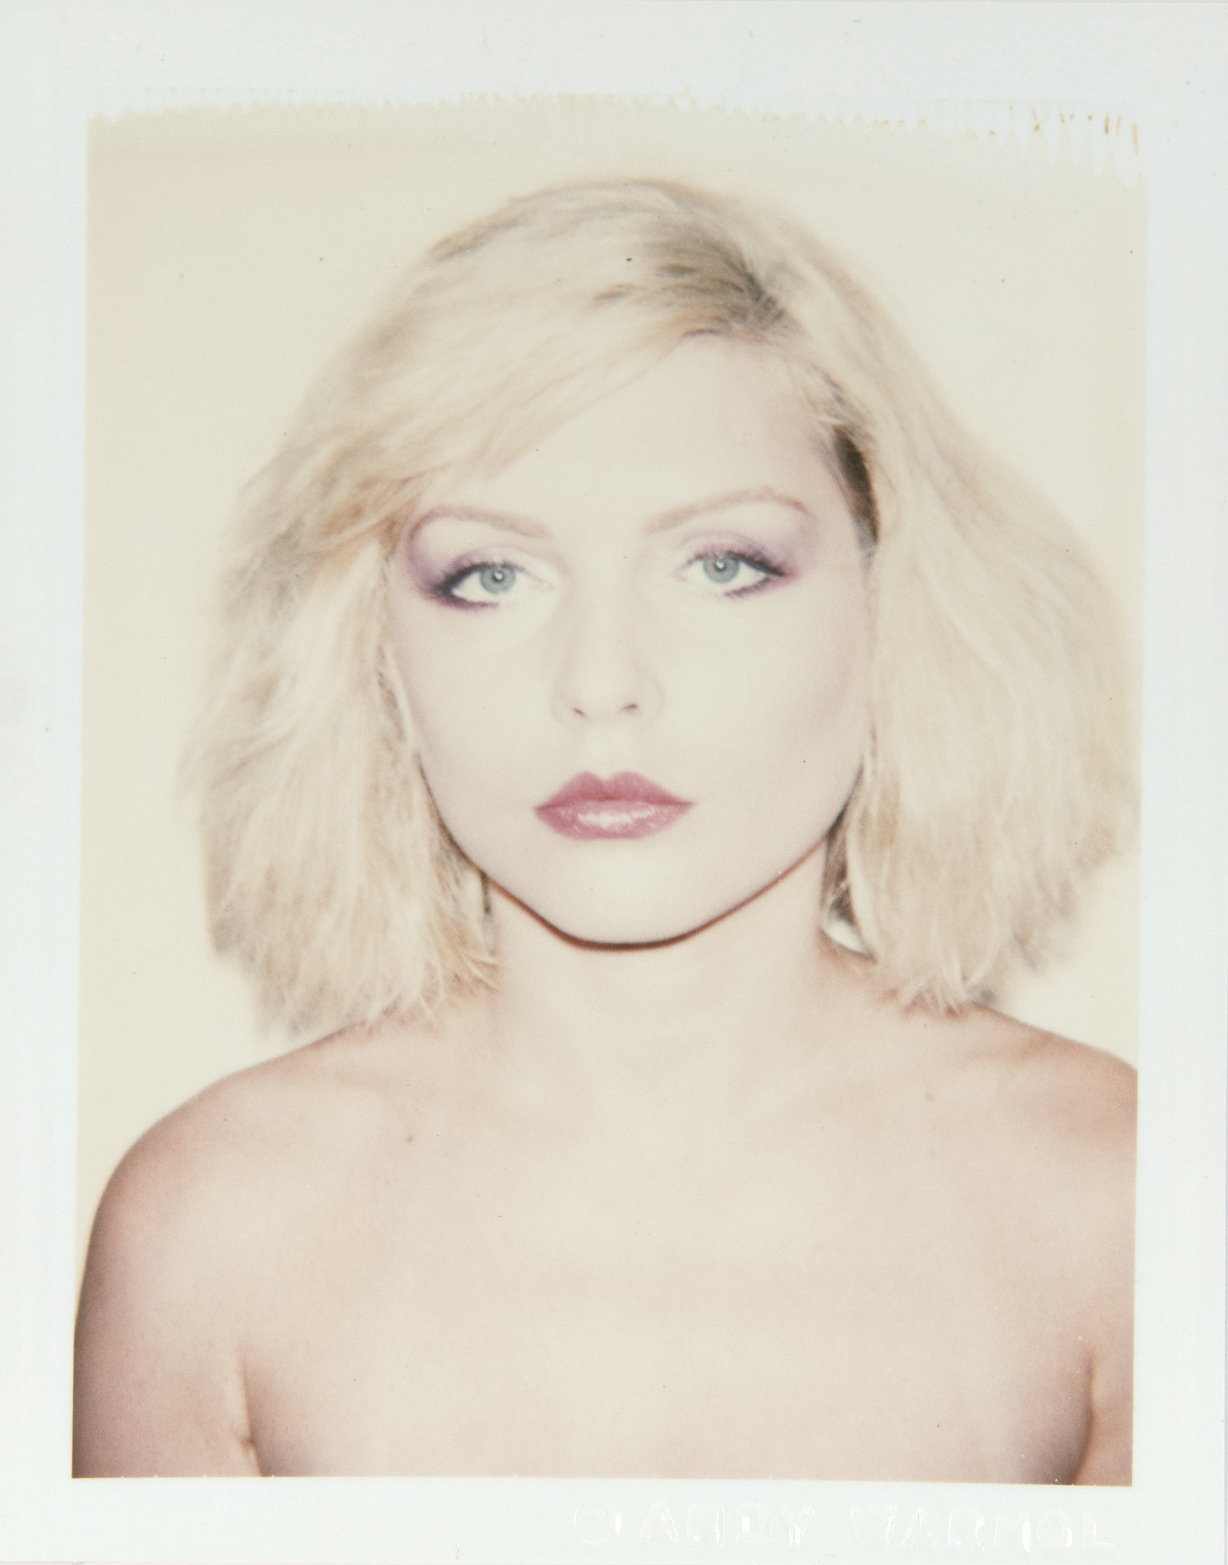 Debbie Harry, 1980 unique Polaroid print © The Andy Warhol Foundation for the Visual Arts, Inc. Licensed by Artists Rights Society (ARS), New York.